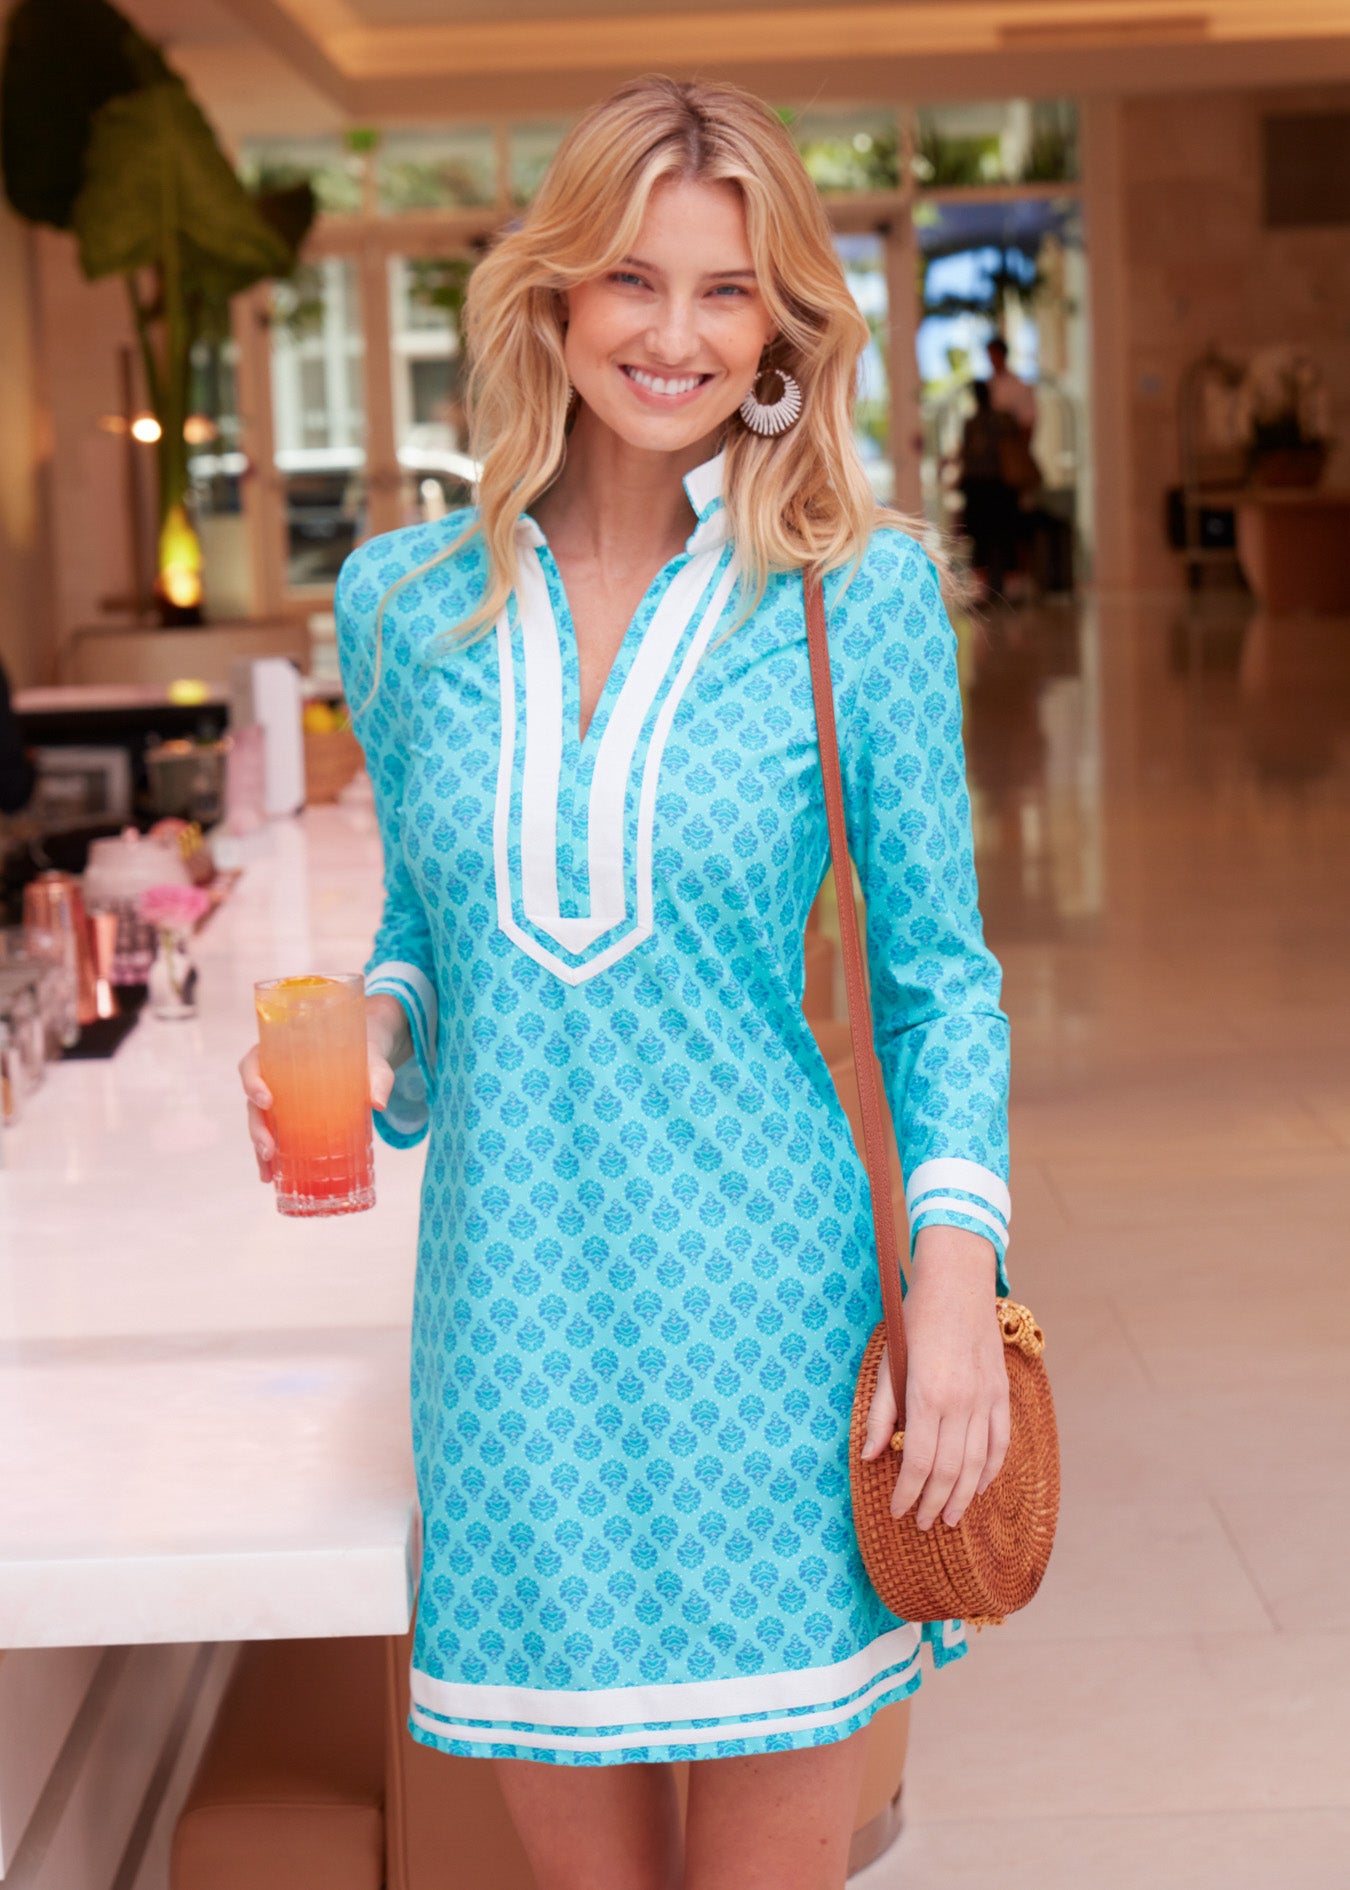 Blonde woman wearing Amalfi Coast Tunic Dress holding drink in hand and with purse on shoulder.